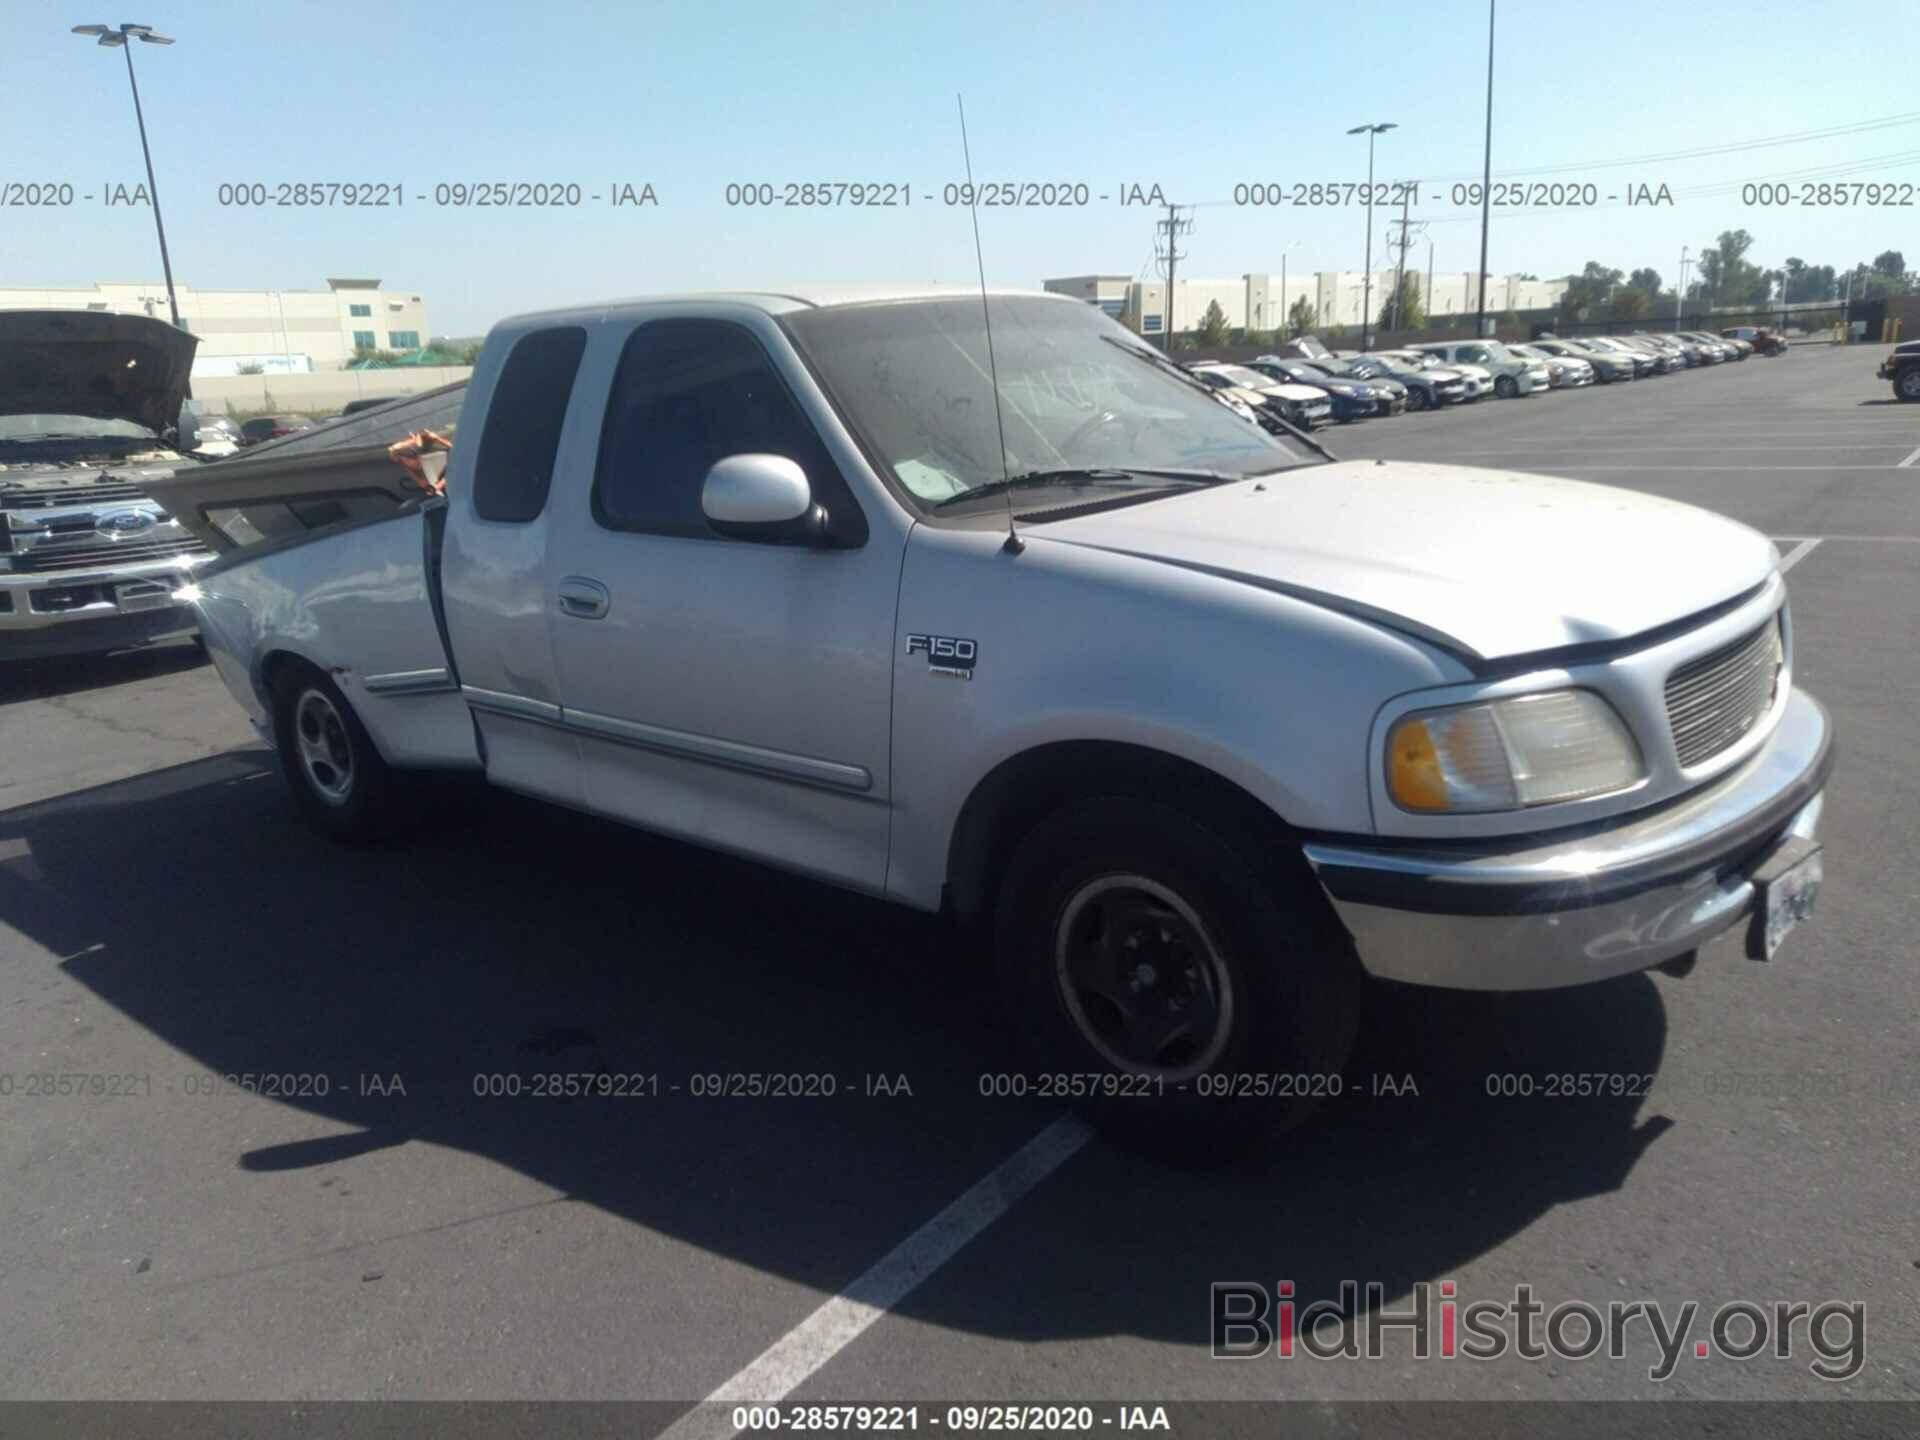 Photo 2FTZX1768WCA41819 - FORD F-150 1998